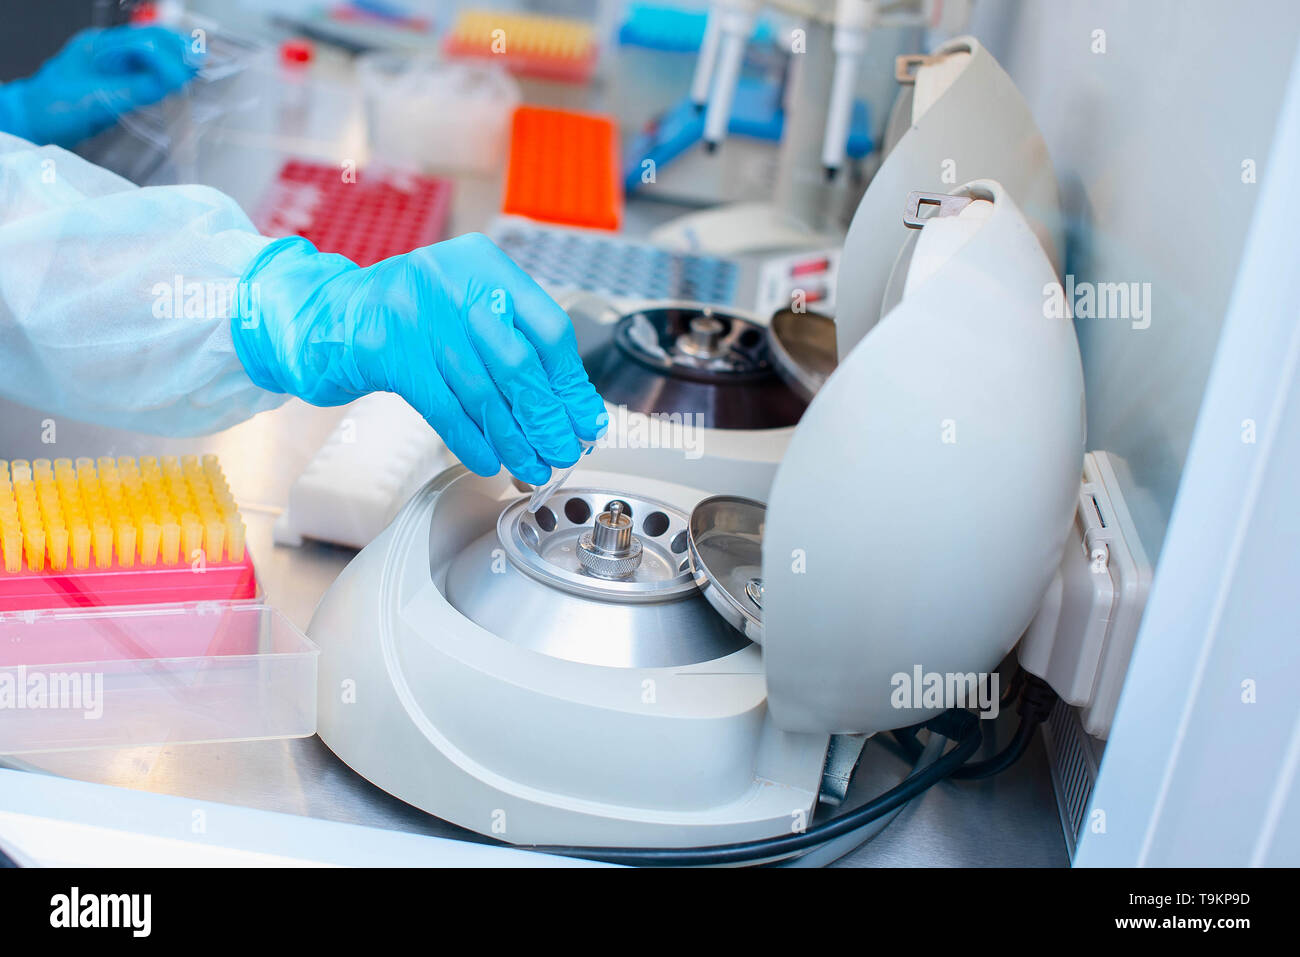 Dna test in the lab. a laboratory technician with a dispenser in his hands is conducting dna analysis in a sterile laboratory behind glass. Stock Photo